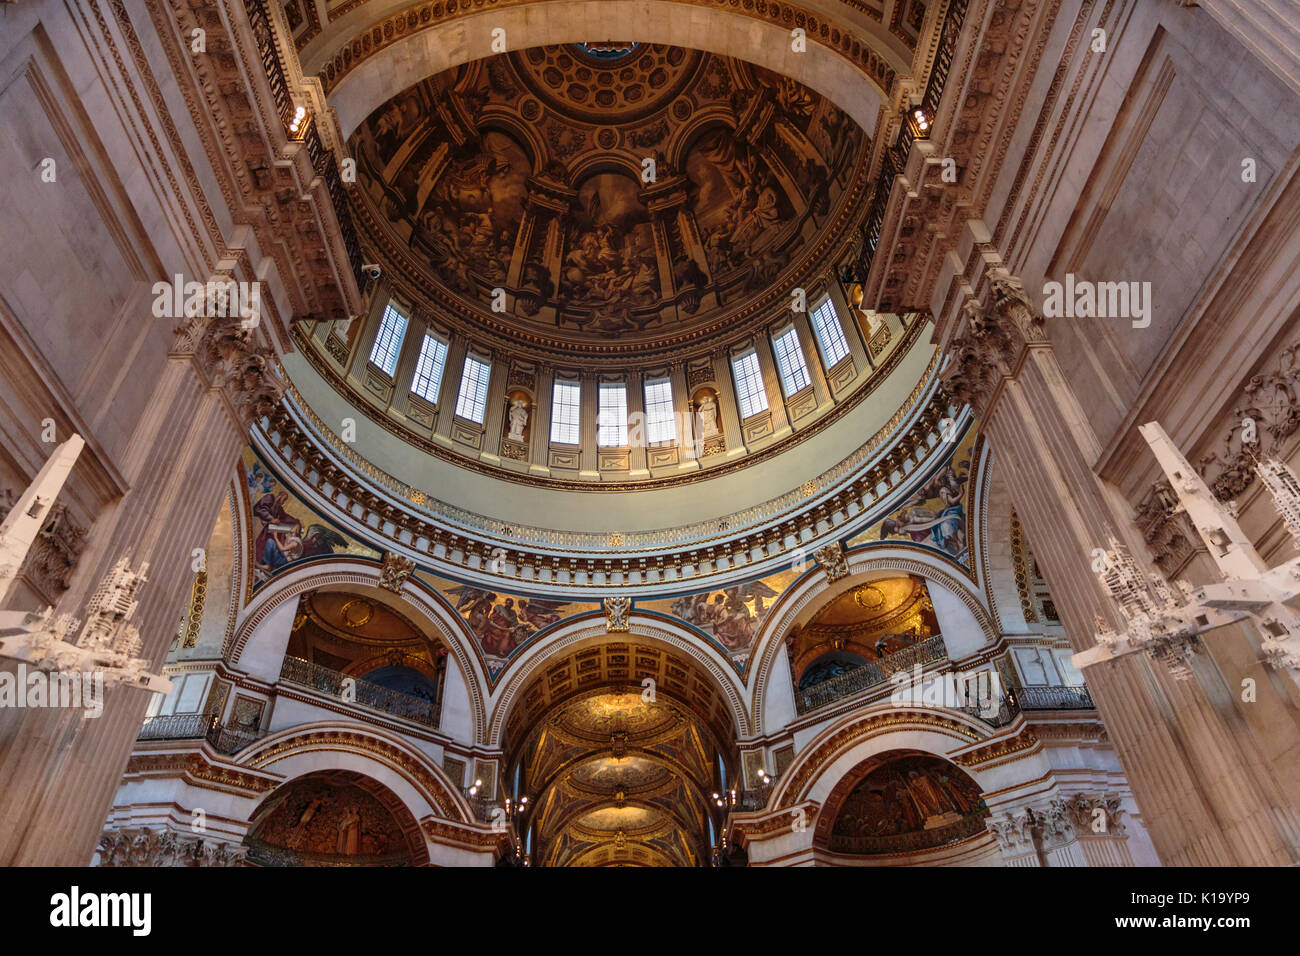 St Paul's Cathedral interior, view up to ceiling murals, paintings, mosaics and gilded decorations, inner dome, London, England Stock Photo